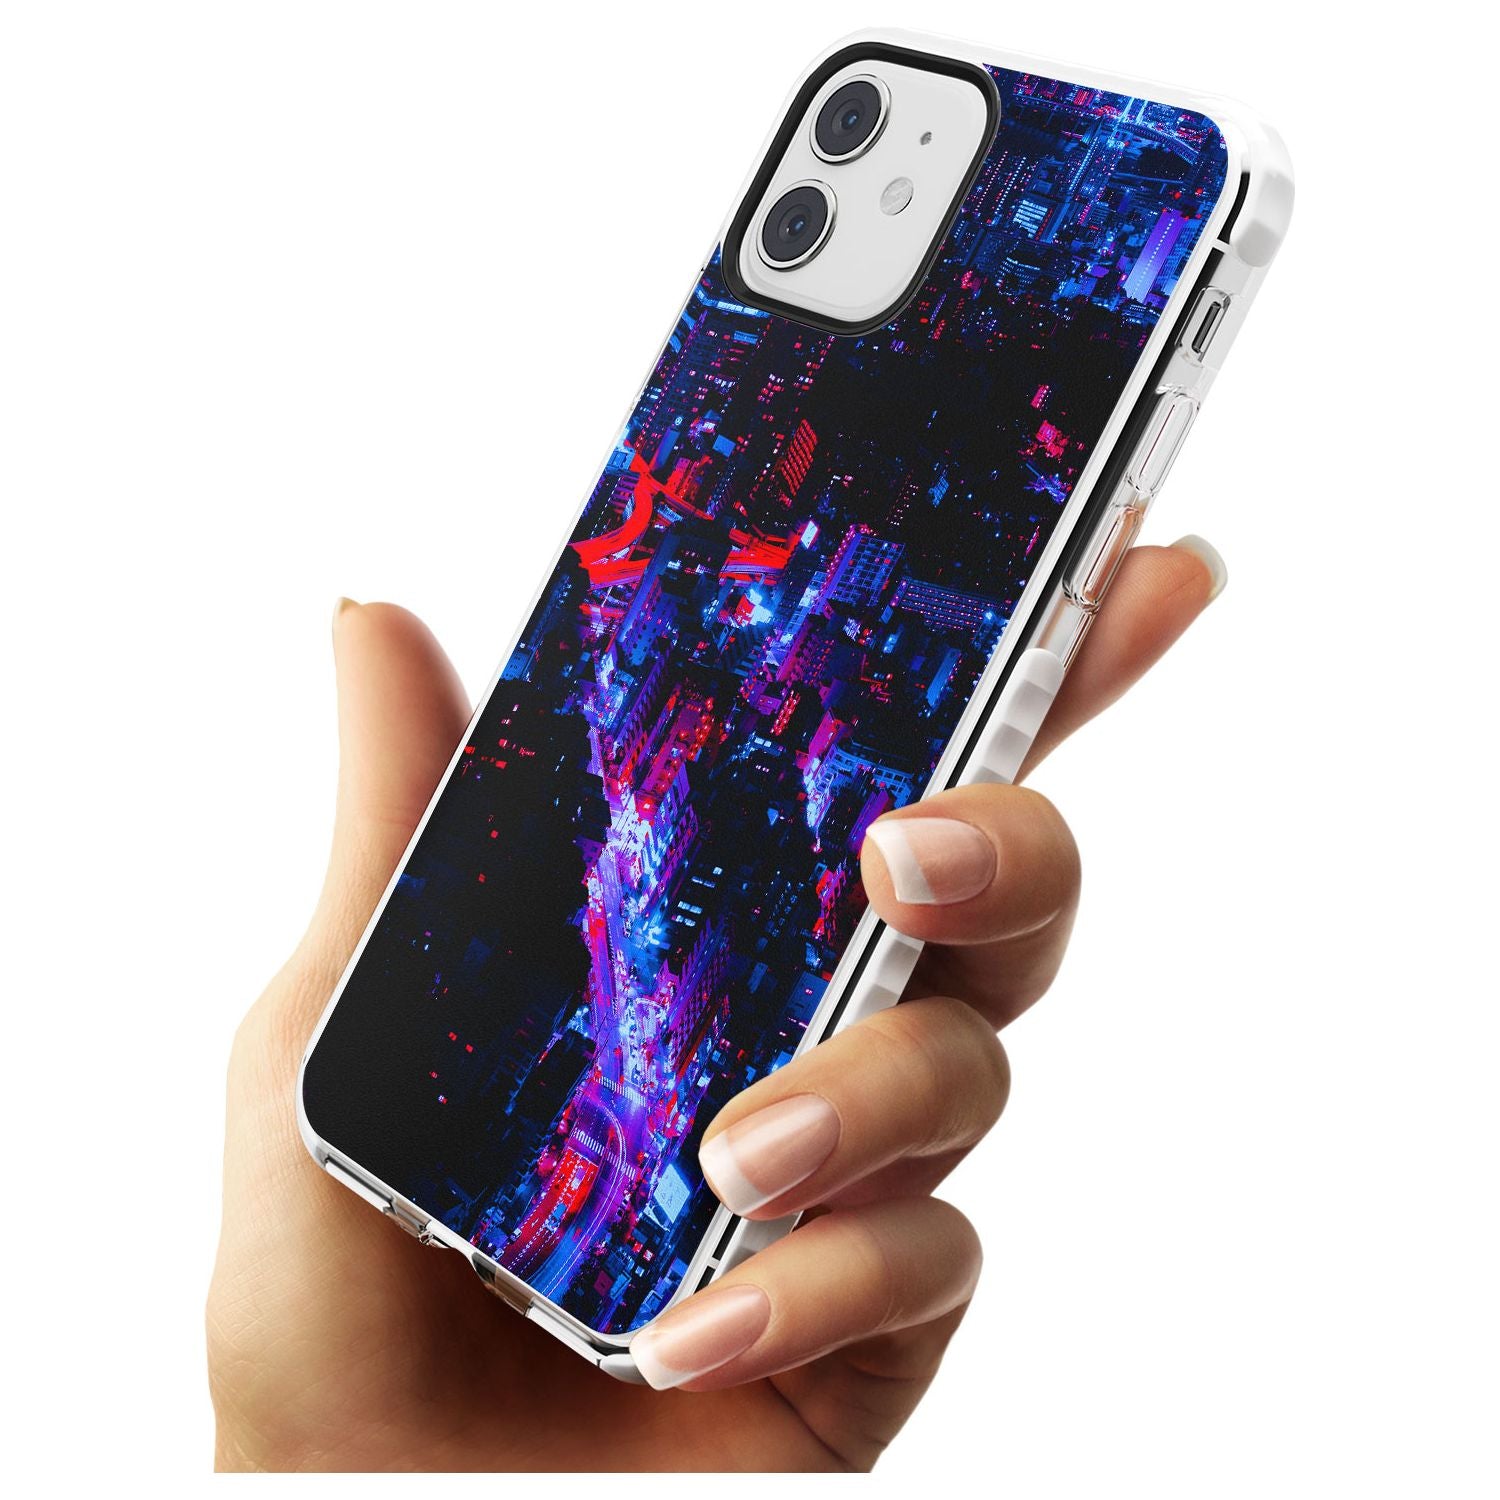 Arial City View - Neon Cities Photographs Impact Phone Case for iPhone 11